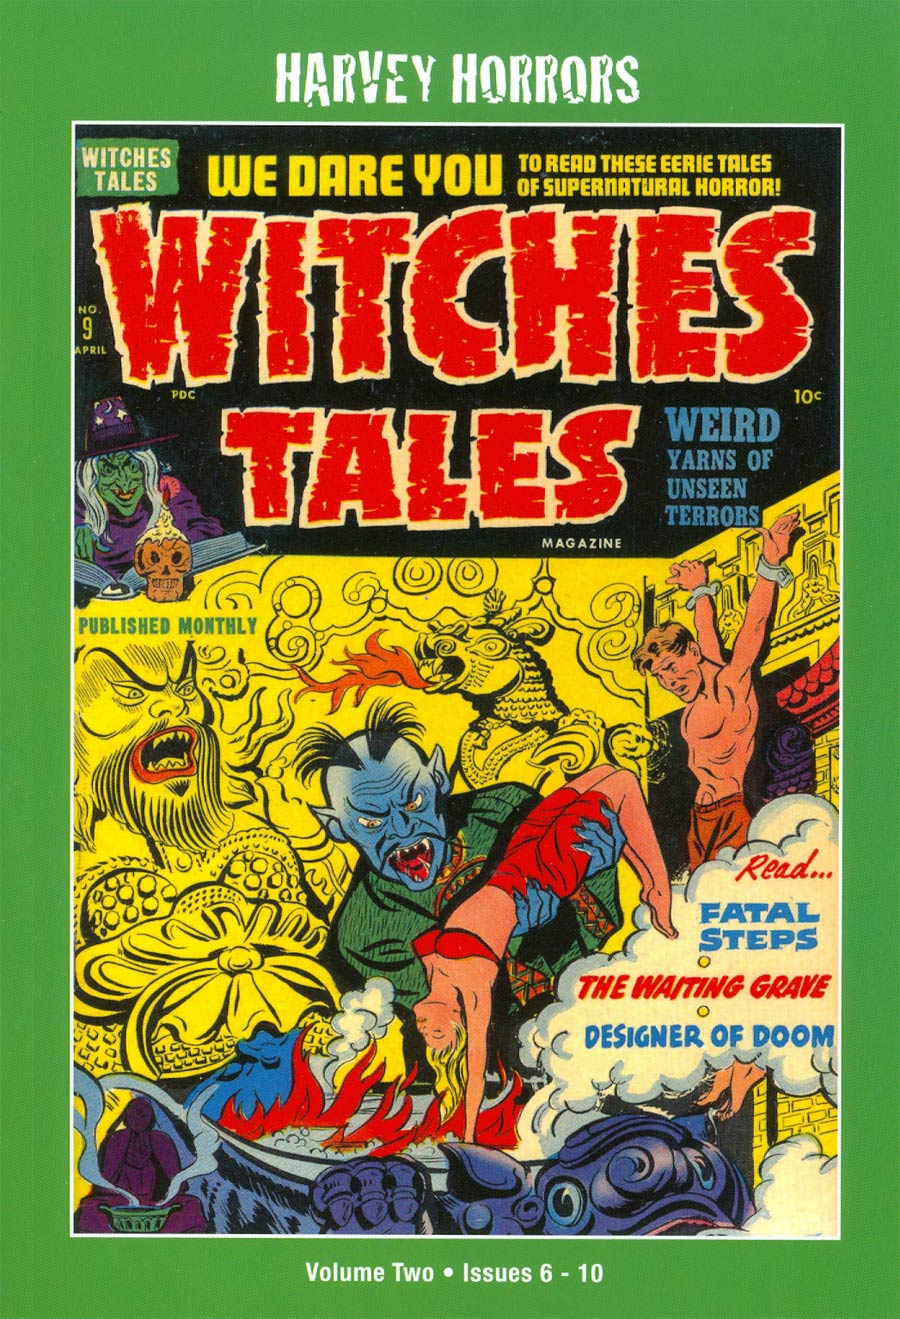 Harvey Horrors Collected Works Witches Tales Softie Vol 2 TP